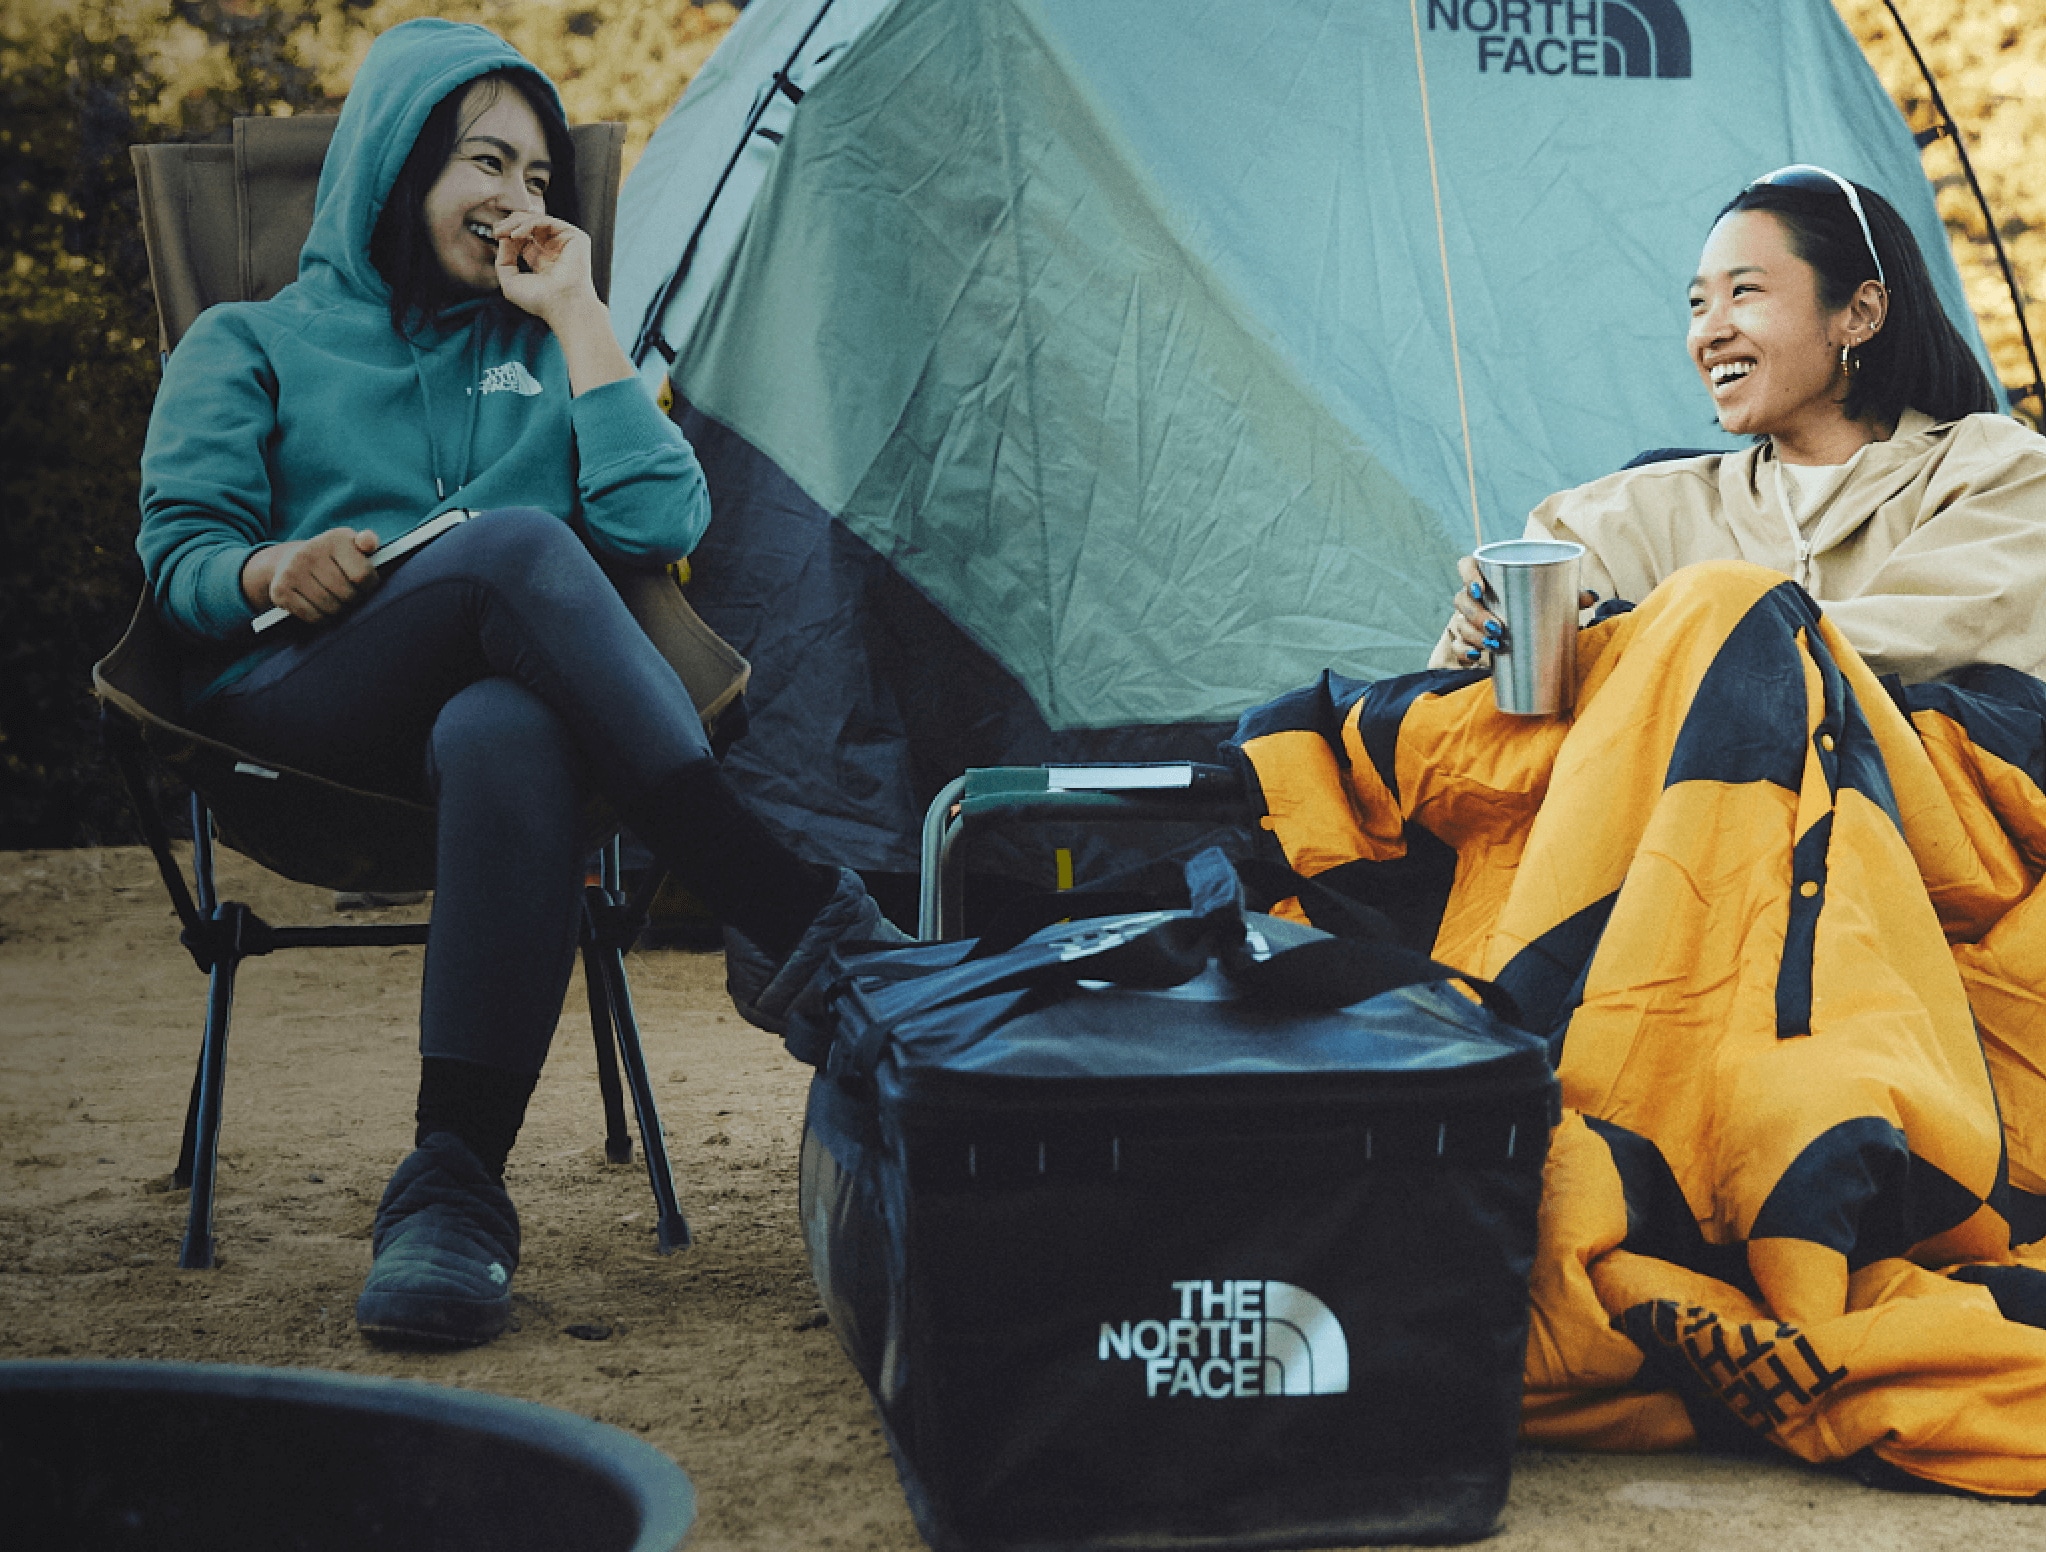 Two people sit on camp chairs at camp, laughing under The North Face blankets. 